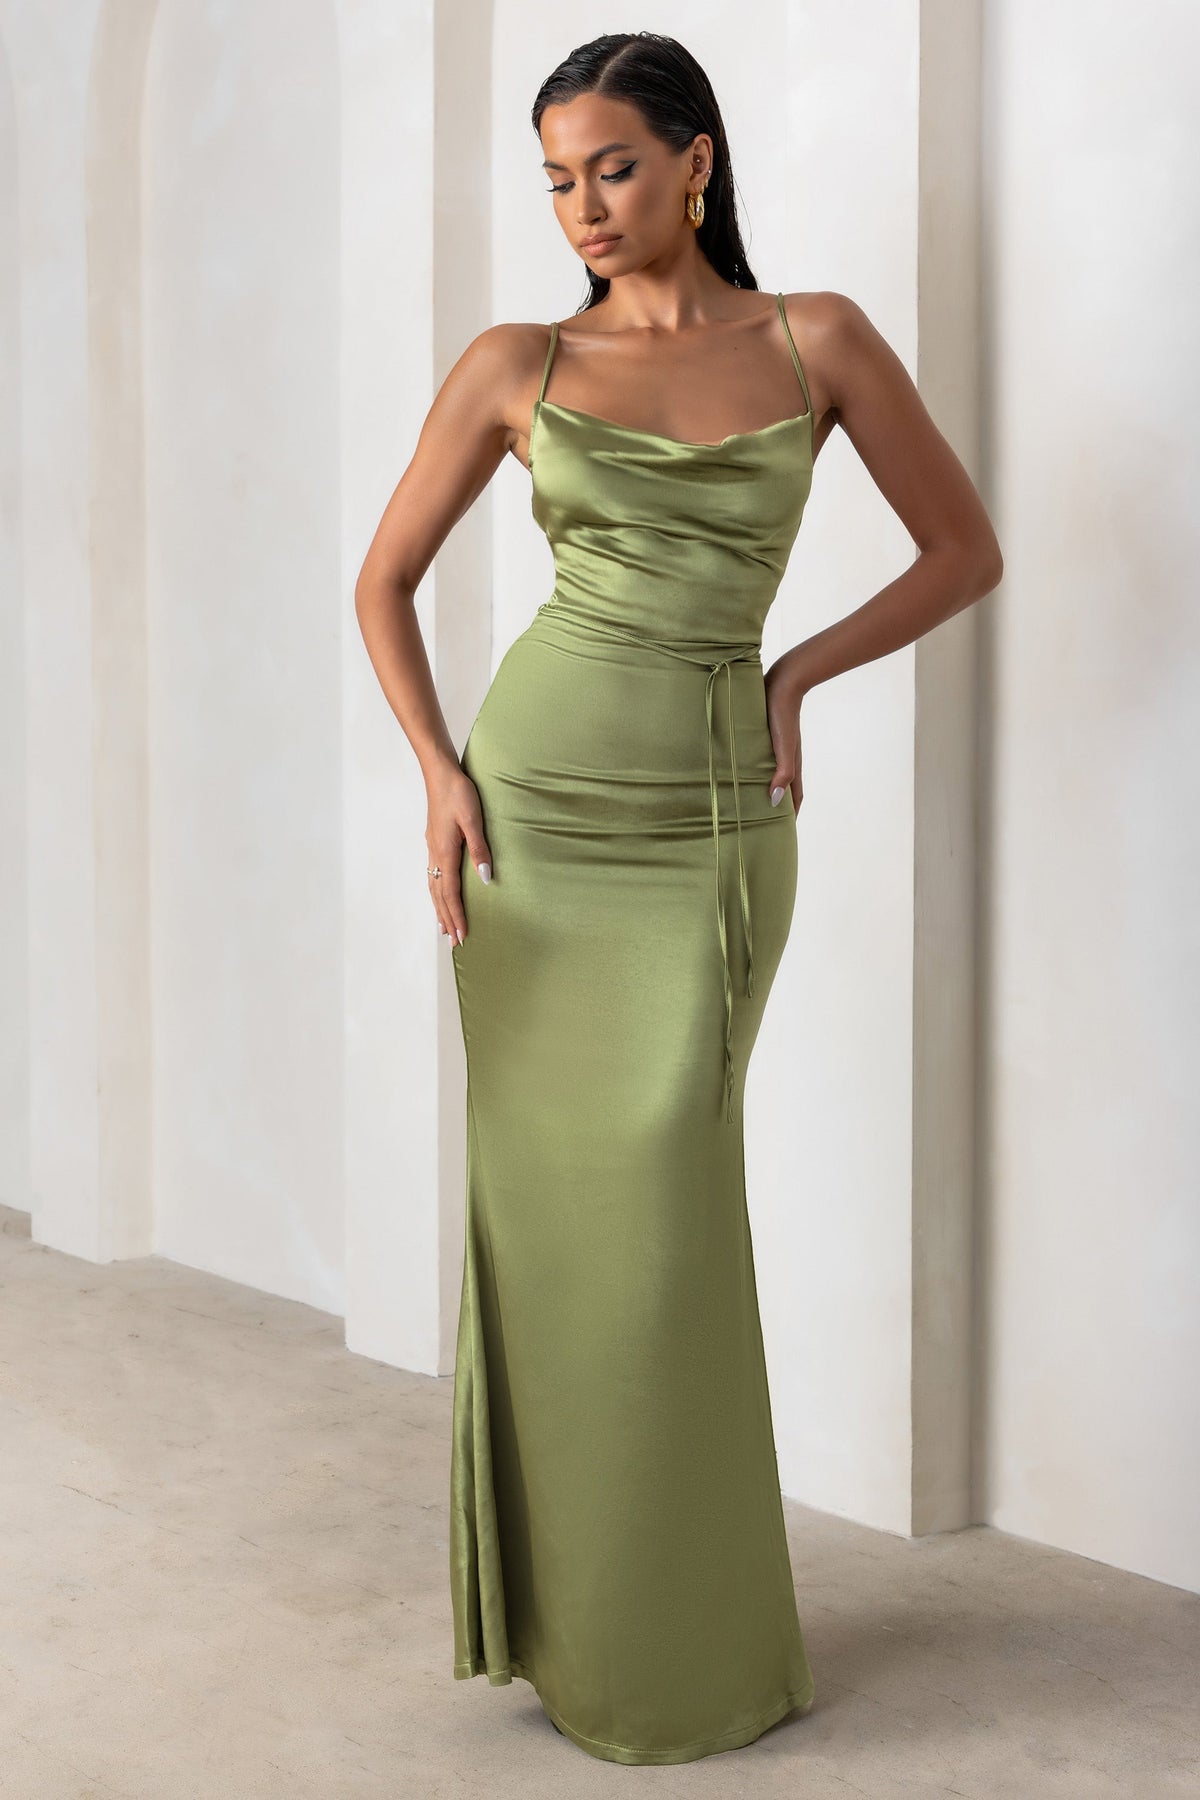 Pista Green Cotton Maxi Dress With Maroon Belt – Shopzters